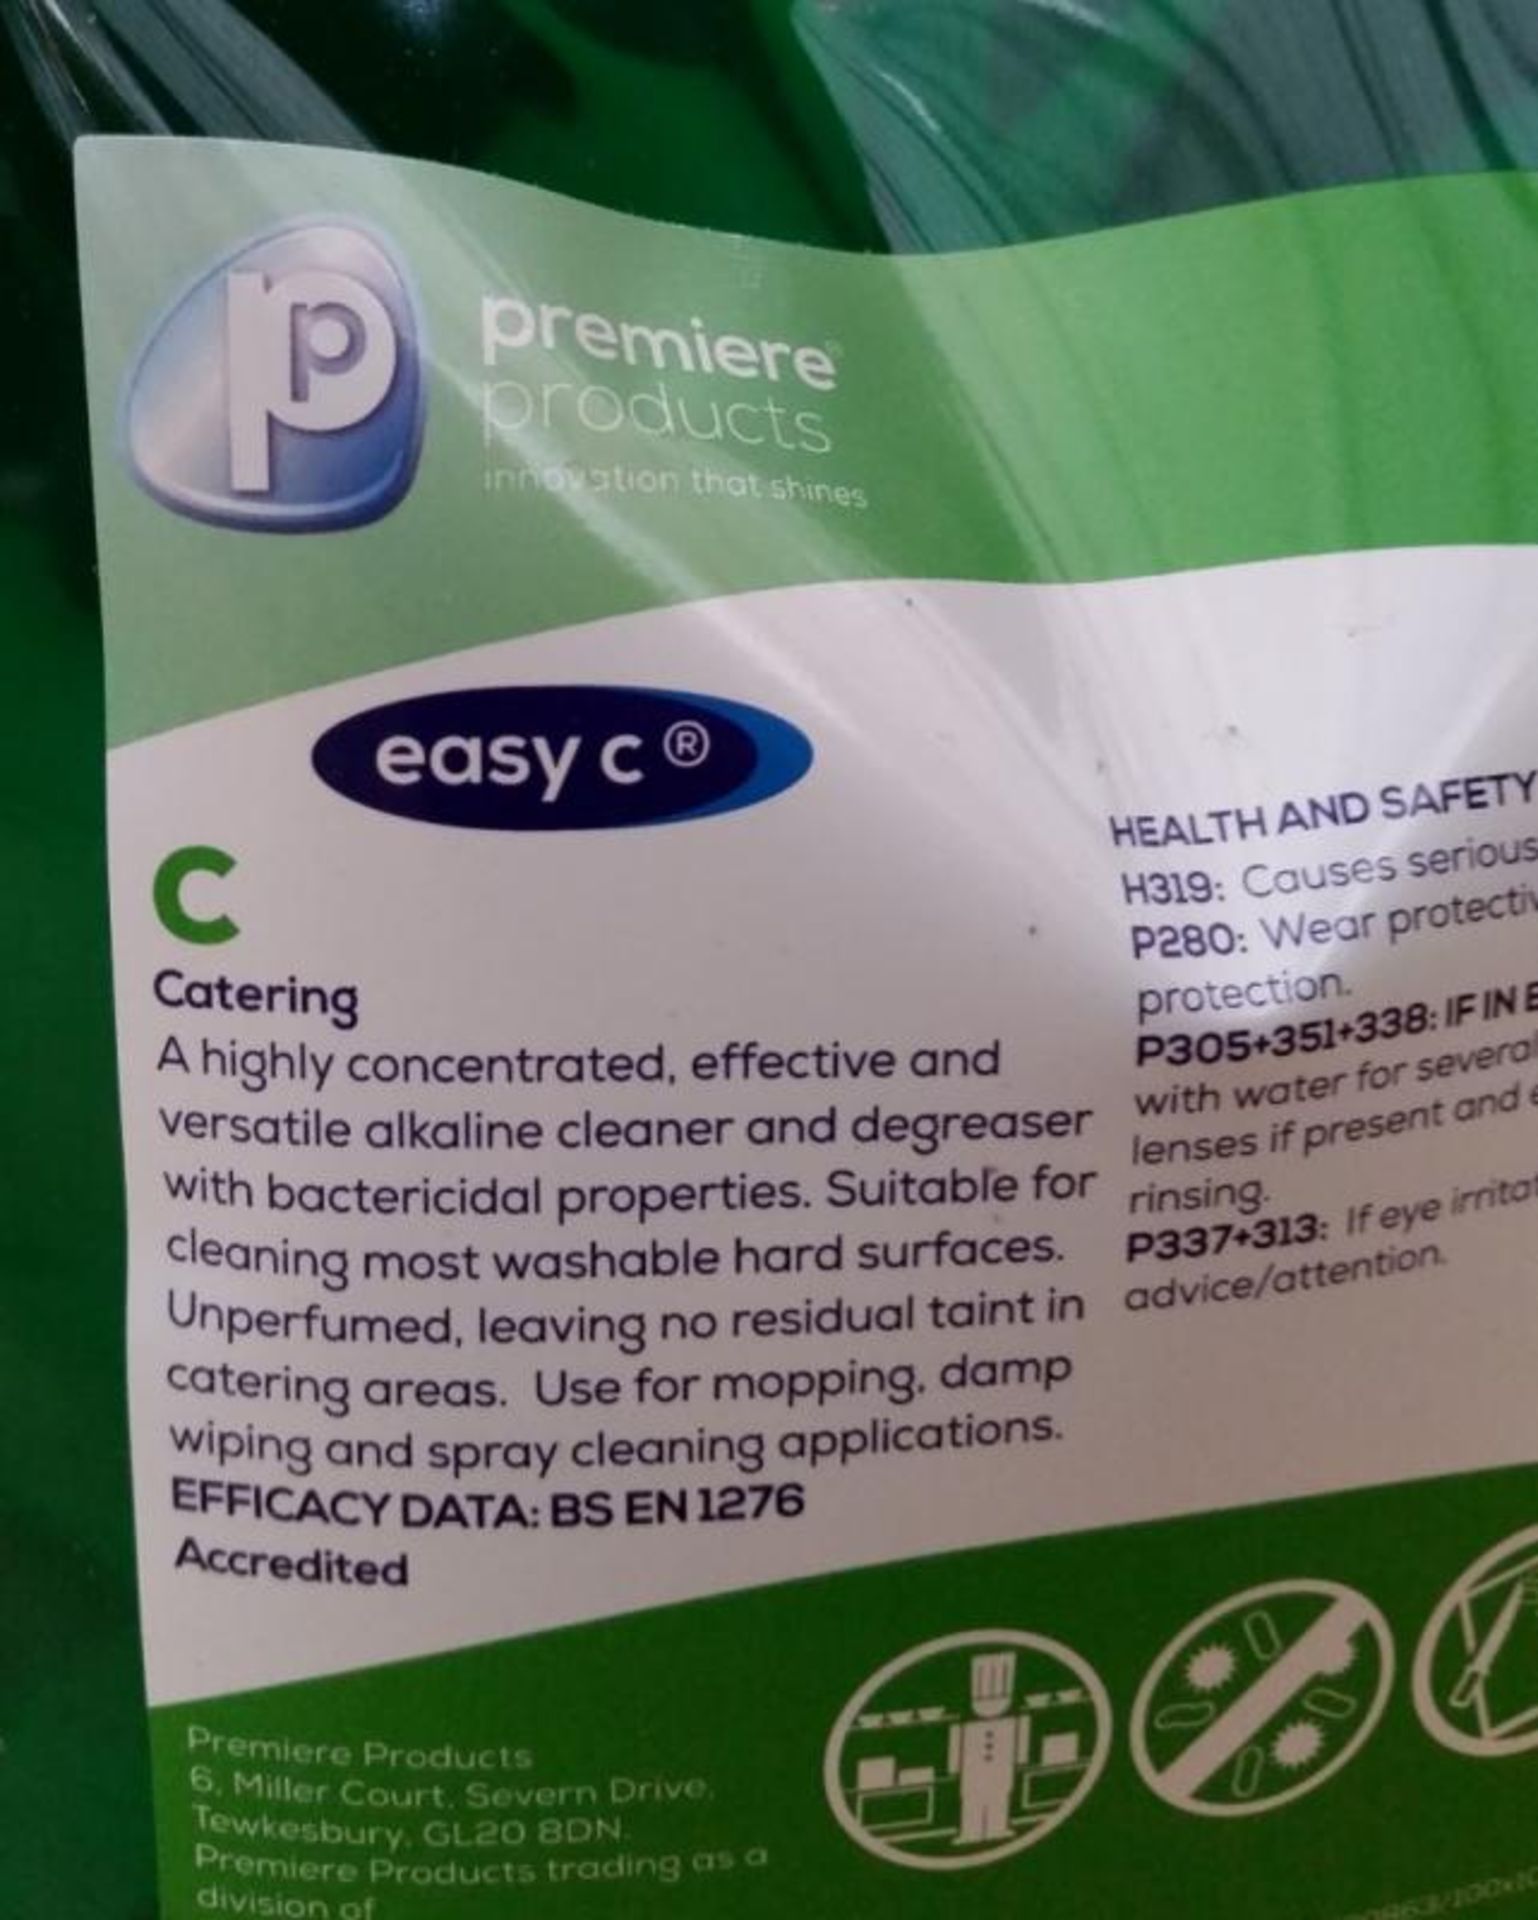 4 x Premiere 1.7 Litre Easy C (Catering) Alkaline Cleaner and Degreaser With Bacterial - Image 5 of 5